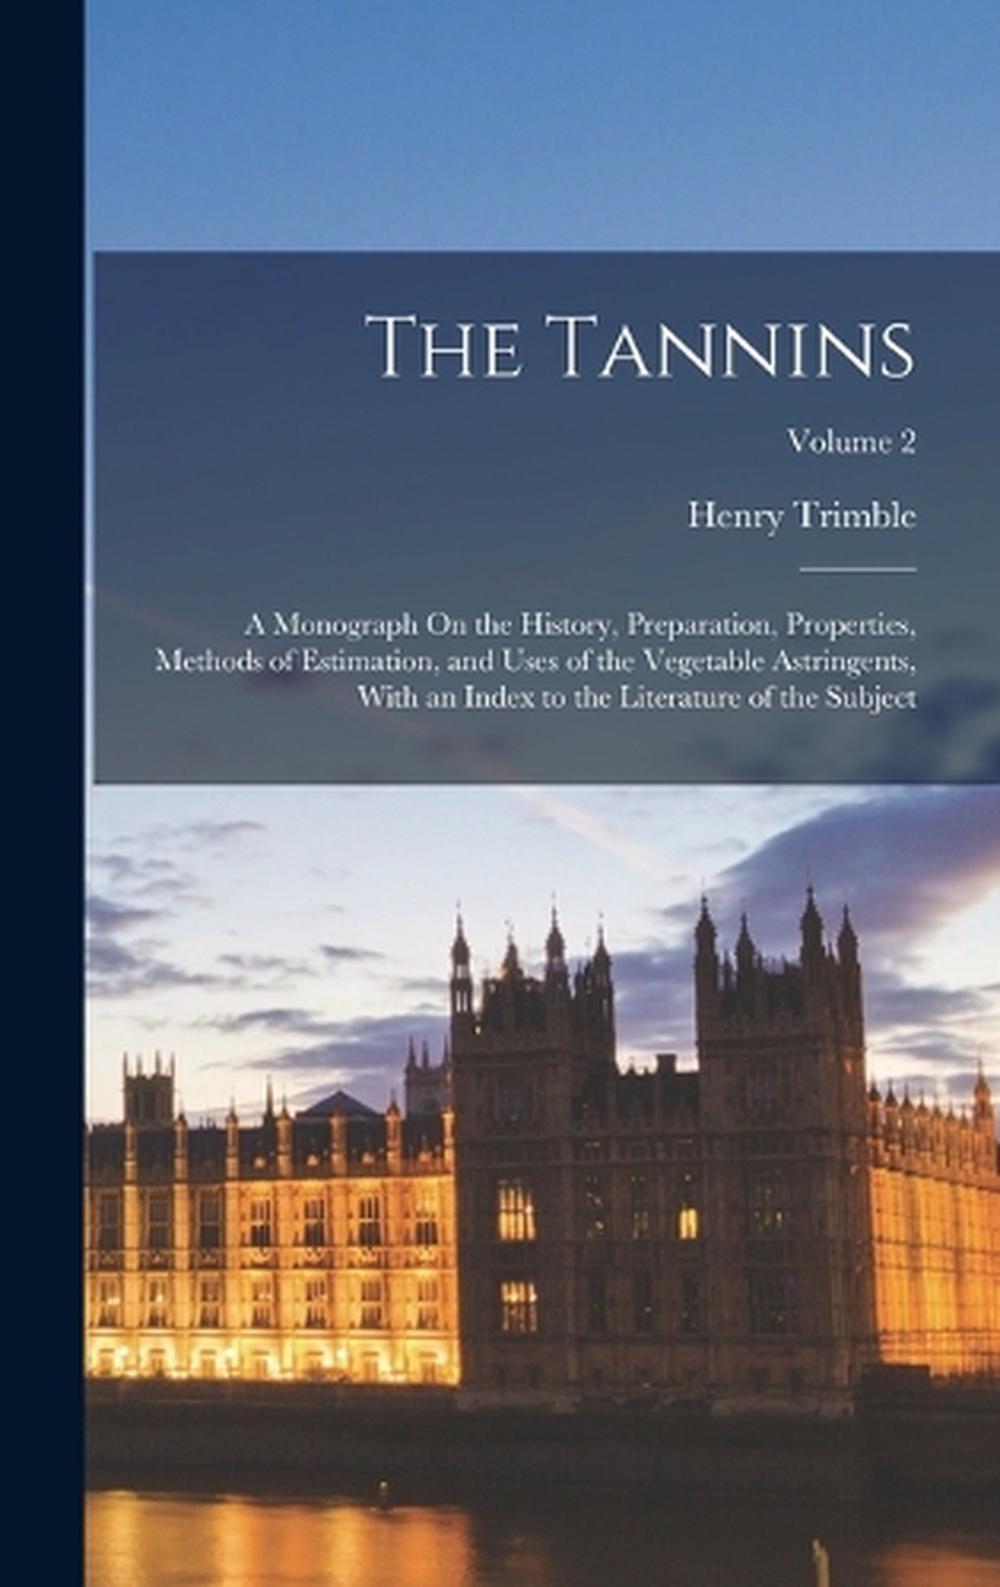 The Tannins: A Monograph On the History, Preparation, Properties, Methods of Est